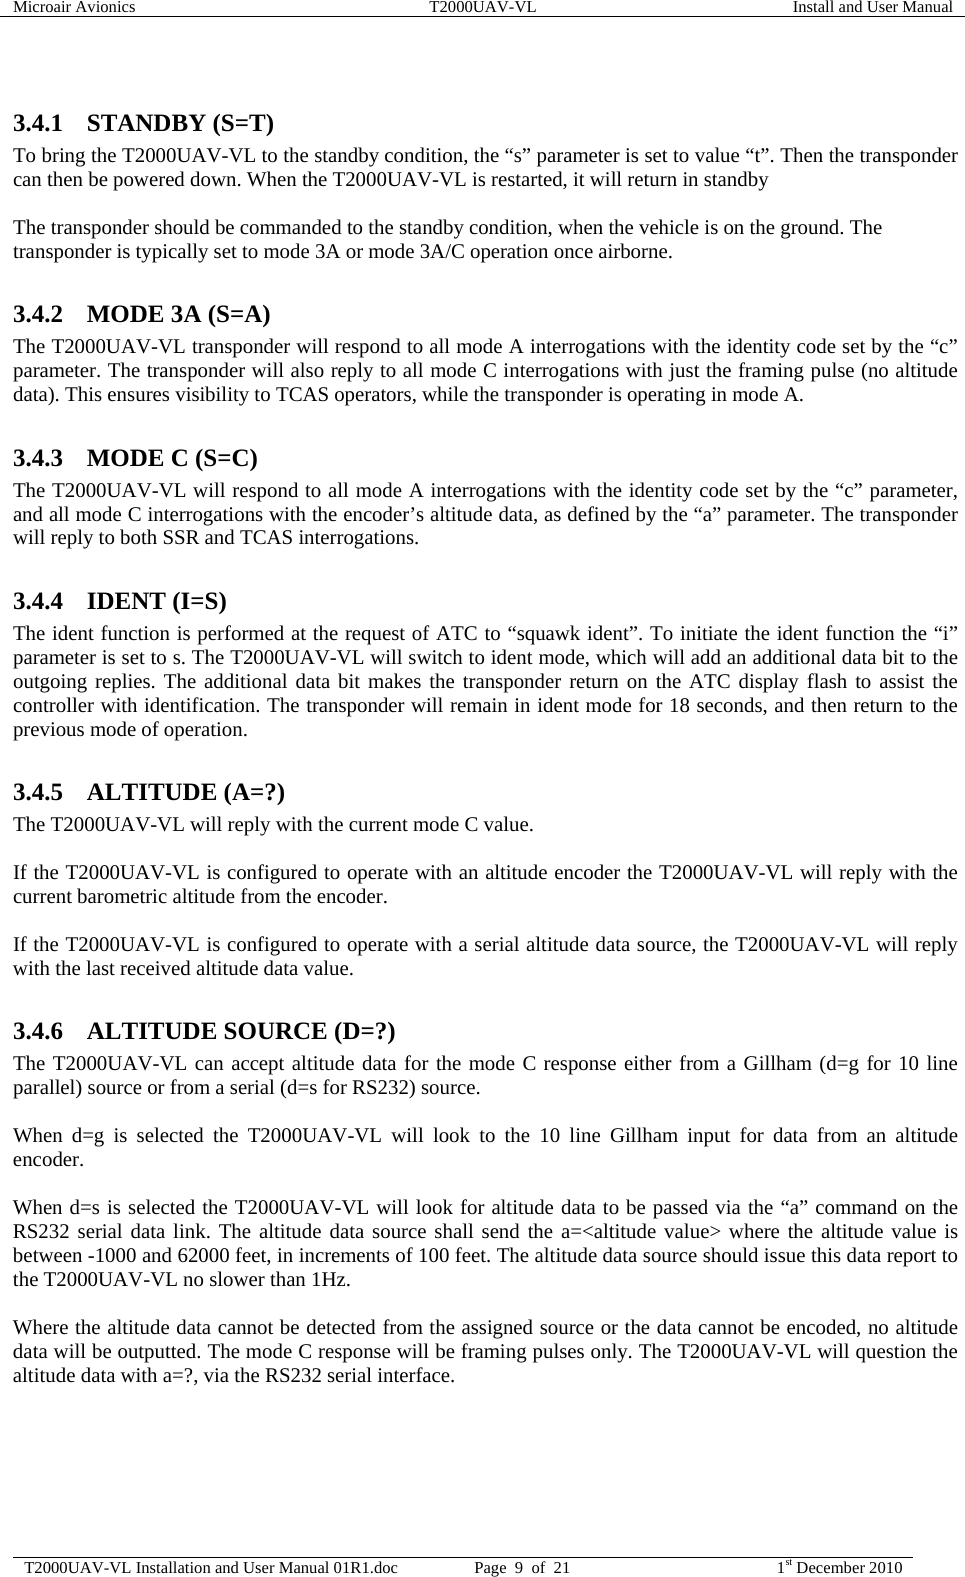 Microair Avionics  T2000UAV-VL  Install and User Manual  T2000UAV-VL Installation and User Manual 01R1.doc  Page  9  of  21  1st December 2010   3.4.1 STANDBY (S=T) To bring the T2000UAV-VL to the standby condition, the “s” parameter is set to value “t”. Then the transponder can then be powered down. When the T2000UAV-VL is restarted, it will return in standby  The transponder should be commanded to the standby condition, when the vehicle is on the ground. The transponder is typically set to mode 3A or mode 3A/C operation once airborne.  3.4.2 MODE 3A (S=A) The T2000UAV-VL transponder will respond to all mode A interrogations with the identity code set by the “c” parameter. The transponder will also reply to all mode C interrogations with just the framing pulse (no altitude data). This ensures visibility to TCAS operators, while the transponder is operating in mode A.  3.4.3 MODE C (S=C) The T2000UAV-VL will respond to all mode A interrogations with the identity code set by the “c” parameter, and all mode C interrogations with the encoder’s altitude data, as defined by the “a” parameter. The transponder will reply to both SSR and TCAS interrogations.  3.4.4 IDENT (I=S) The ident function is performed at the request of ATC to “squawk ident”. To initiate the ident function the “i” parameter is set to s. The T2000UAV-VL will switch to ident mode, which will add an additional data bit to the outgoing replies. The additional data bit makes the transponder return on the ATC display flash to assist the controller with identification. The transponder will remain in ident mode for 18 seconds, and then return to the previous mode of operation.  3.4.5 ALTITUDE (A=?) The T2000UAV-VL will reply with the current mode C value.  If the T2000UAV-VL is configured to operate with an altitude encoder the T2000UAV-VL will reply with the current barometric altitude from the encoder.  If the T2000UAV-VL is configured to operate with a serial altitude data source, the T2000UAV-VL will reply with the last received altitude data value.  3.4.6 ALTITUDE SOURCE (D=?) The T2000UAV-VL can accept altitude data for the mode C response either from a Gillham (d=g for 10 line parallel) source or from a serial (d=s for RS232) source.  When d=g is selected the T2000UAV-VL will look to the 10 line Gillham input for data from an altitude encoder.  When d=s is selected the T2000UAV-VL will look for altitude data to be passed via the “a” command on the RS232 serial data link. The altitude data source shall send the a=&lt;altitude value&gt; where the altitude value is between -1000 and 62000 feet, in increments of 100 feet. The altitude data source should issue this data report to the T2000UAV-VL no slower than 1Hz.  Where the altitude data cannot be detected from the assigned source or the data cannot be encoded, no altitude data will be outputted. The mode C response will be framing pulses only. The T2000UAV-VL will question the altitude data with a=?, via the RS232 serial interface.  